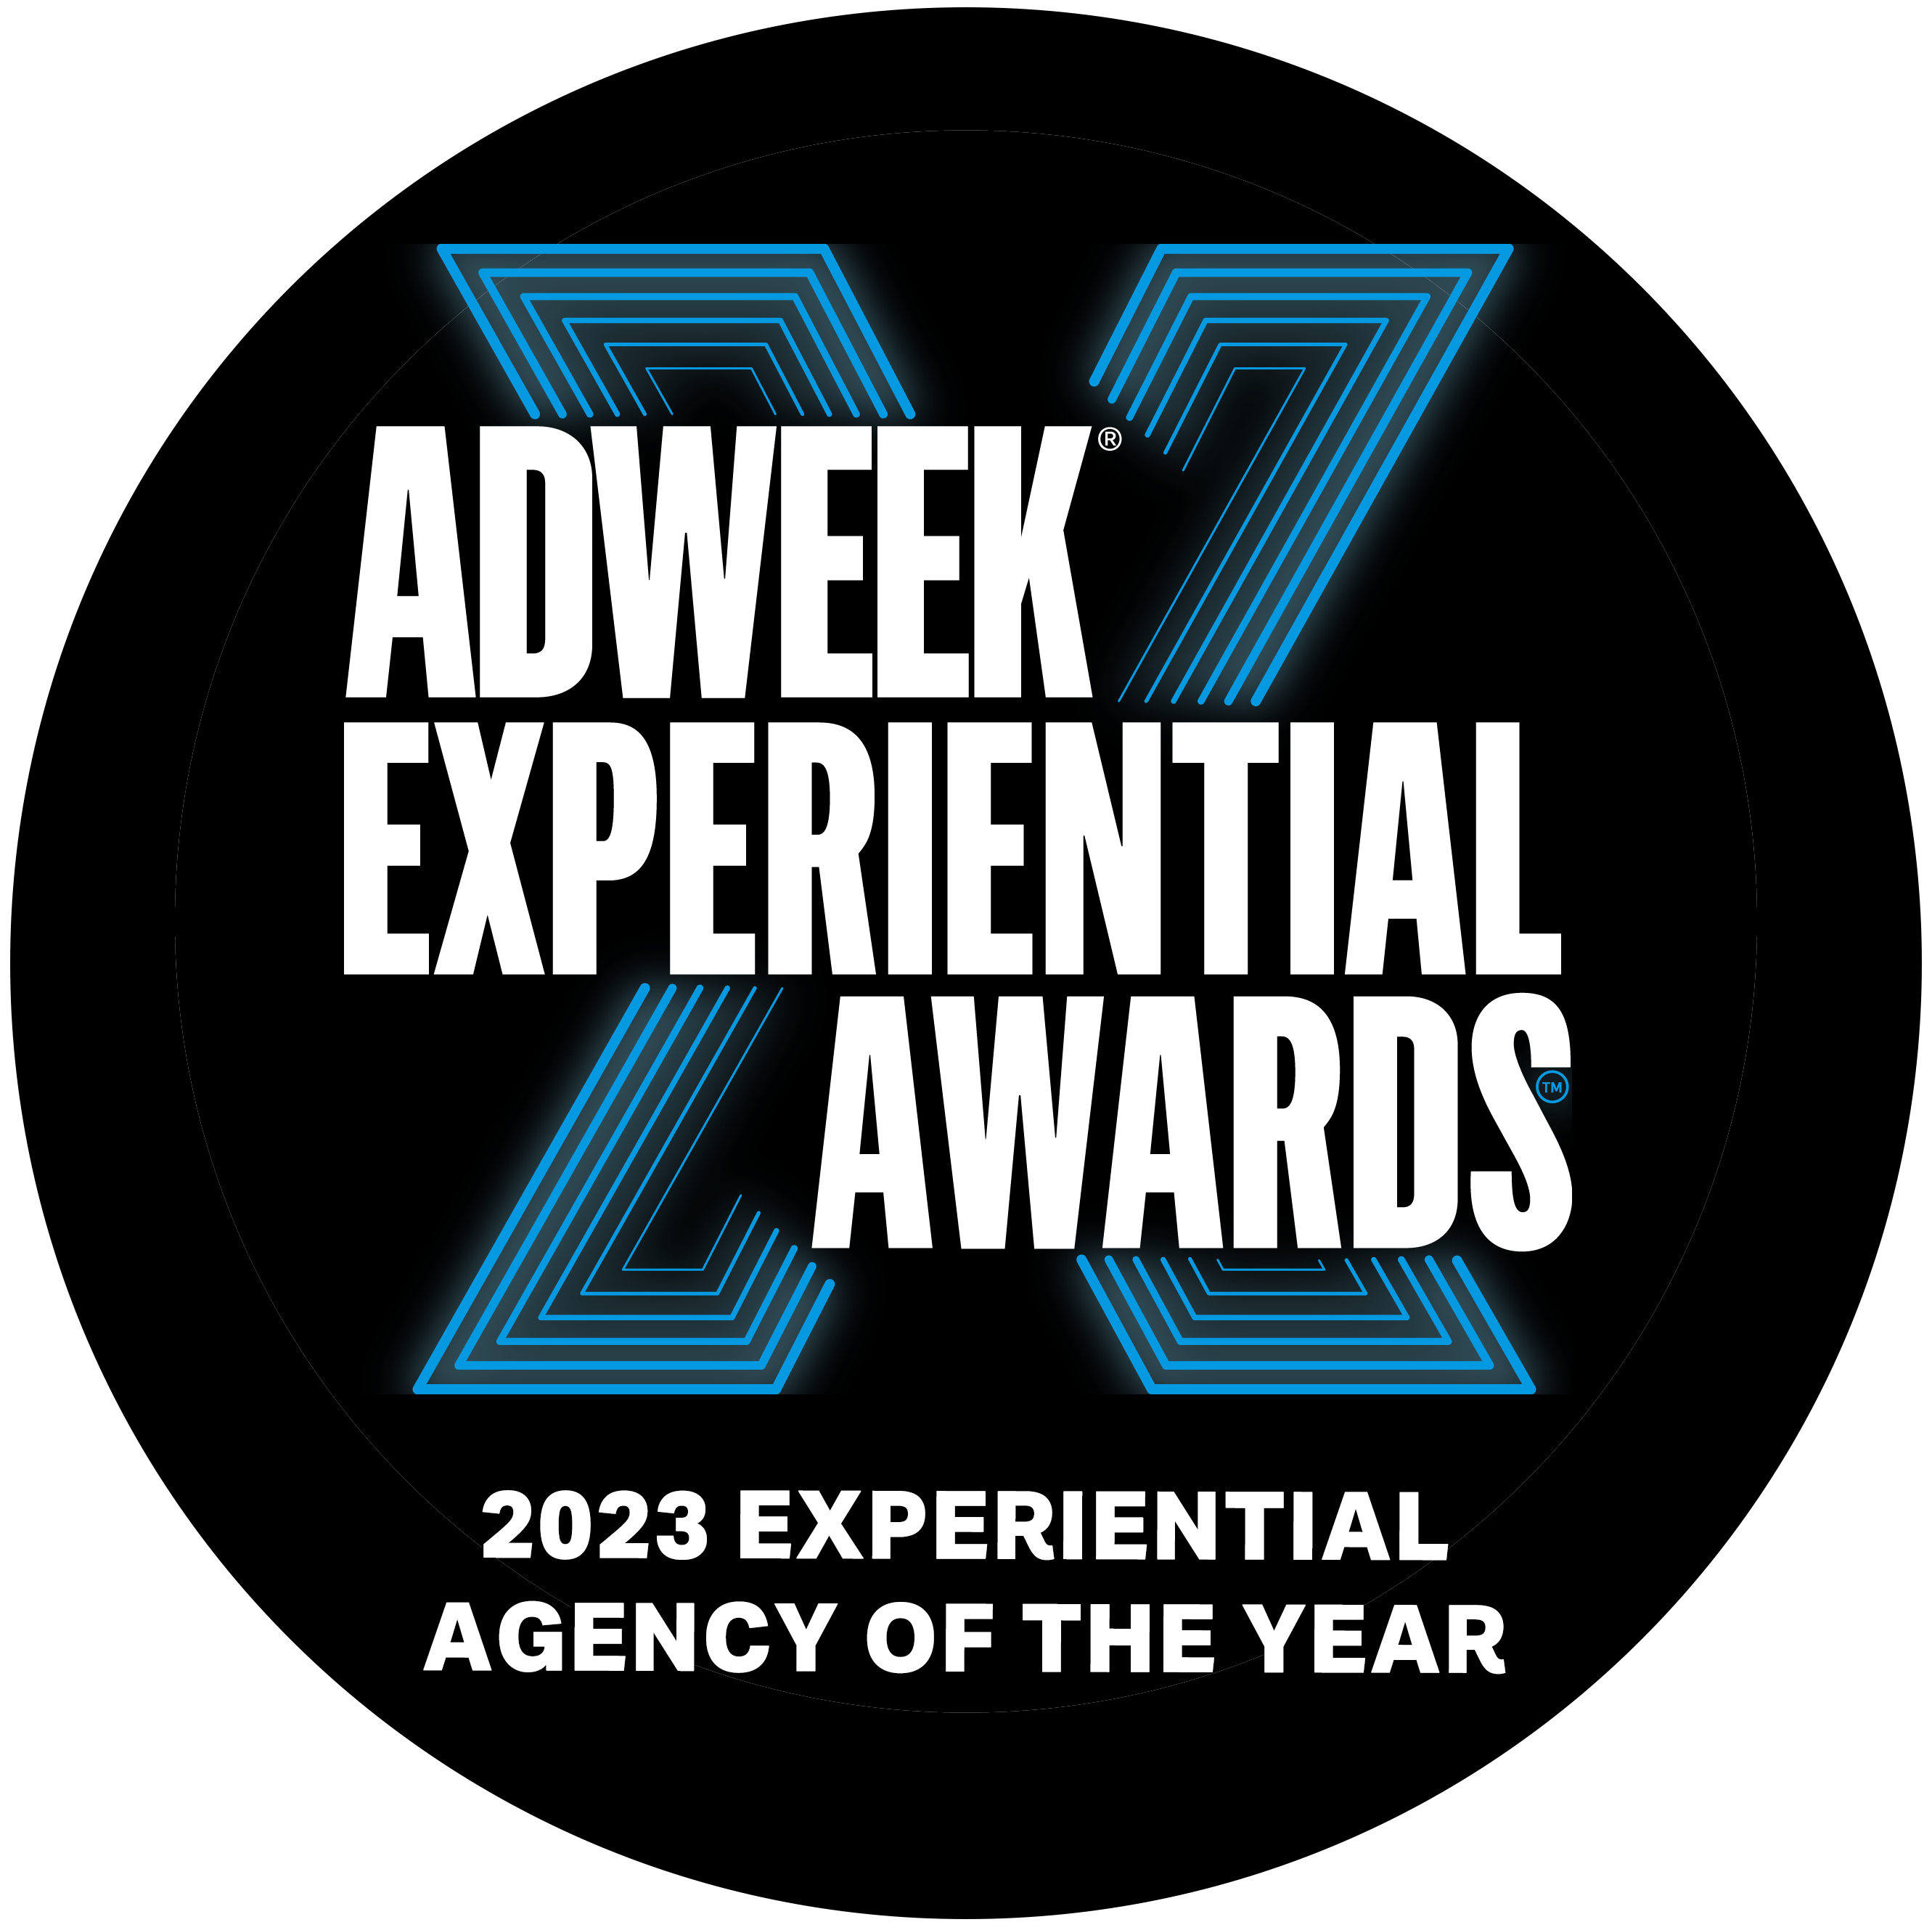 Experiential Marketing Agency of the year logo for Jack Morton Brand Experience agency